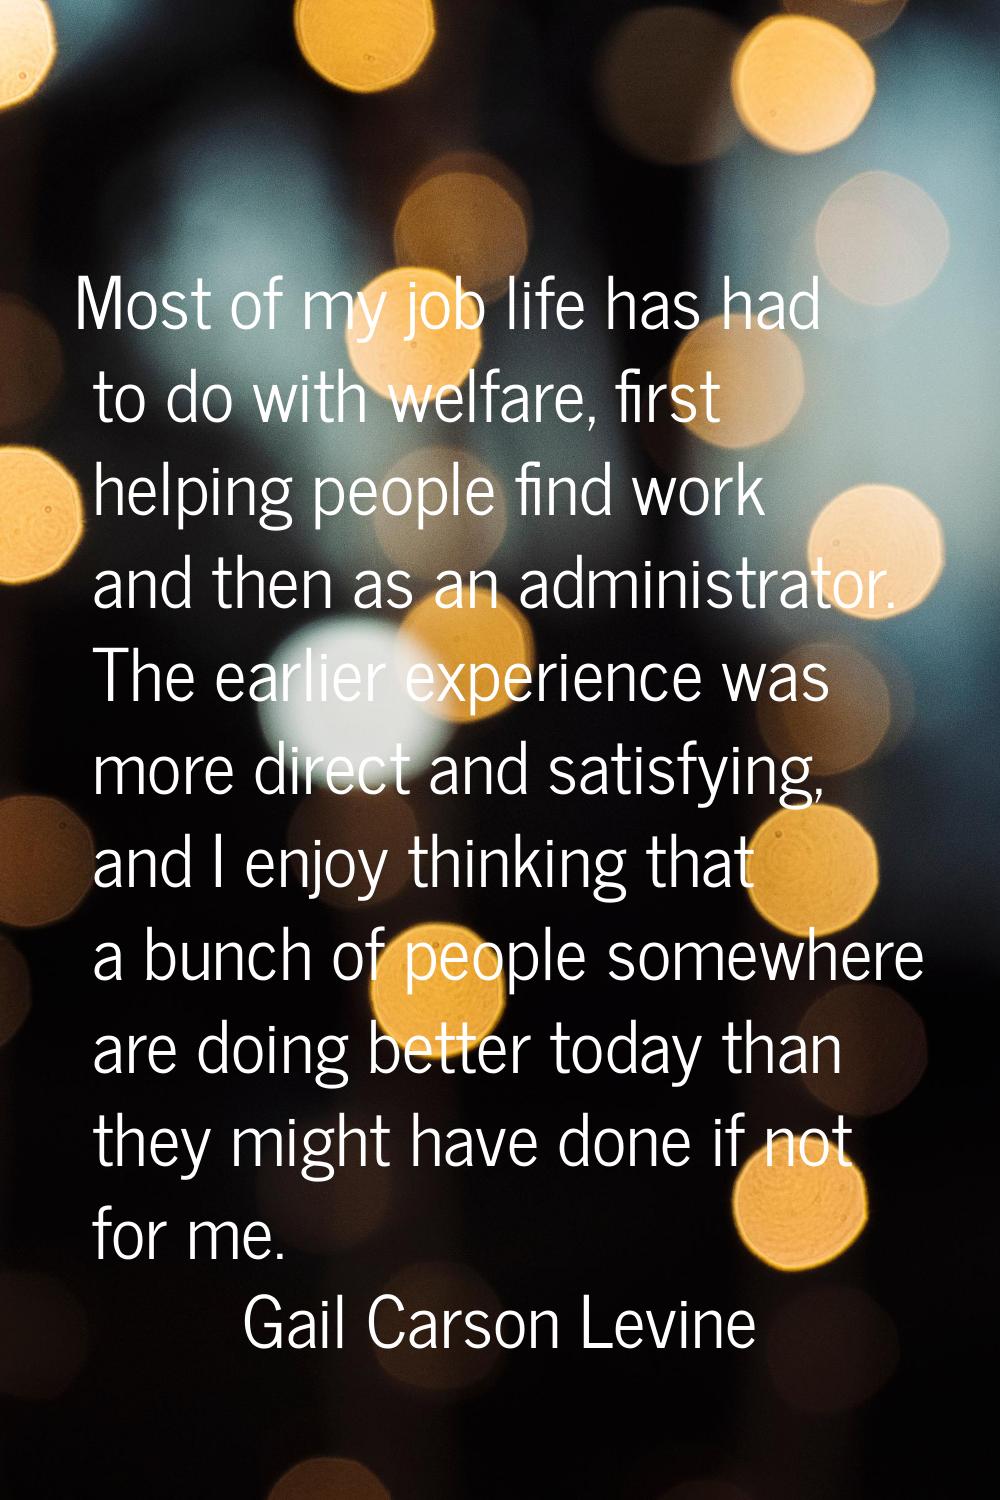 Most of my job life has had to do with welfare, first helping people find work and then as an admin